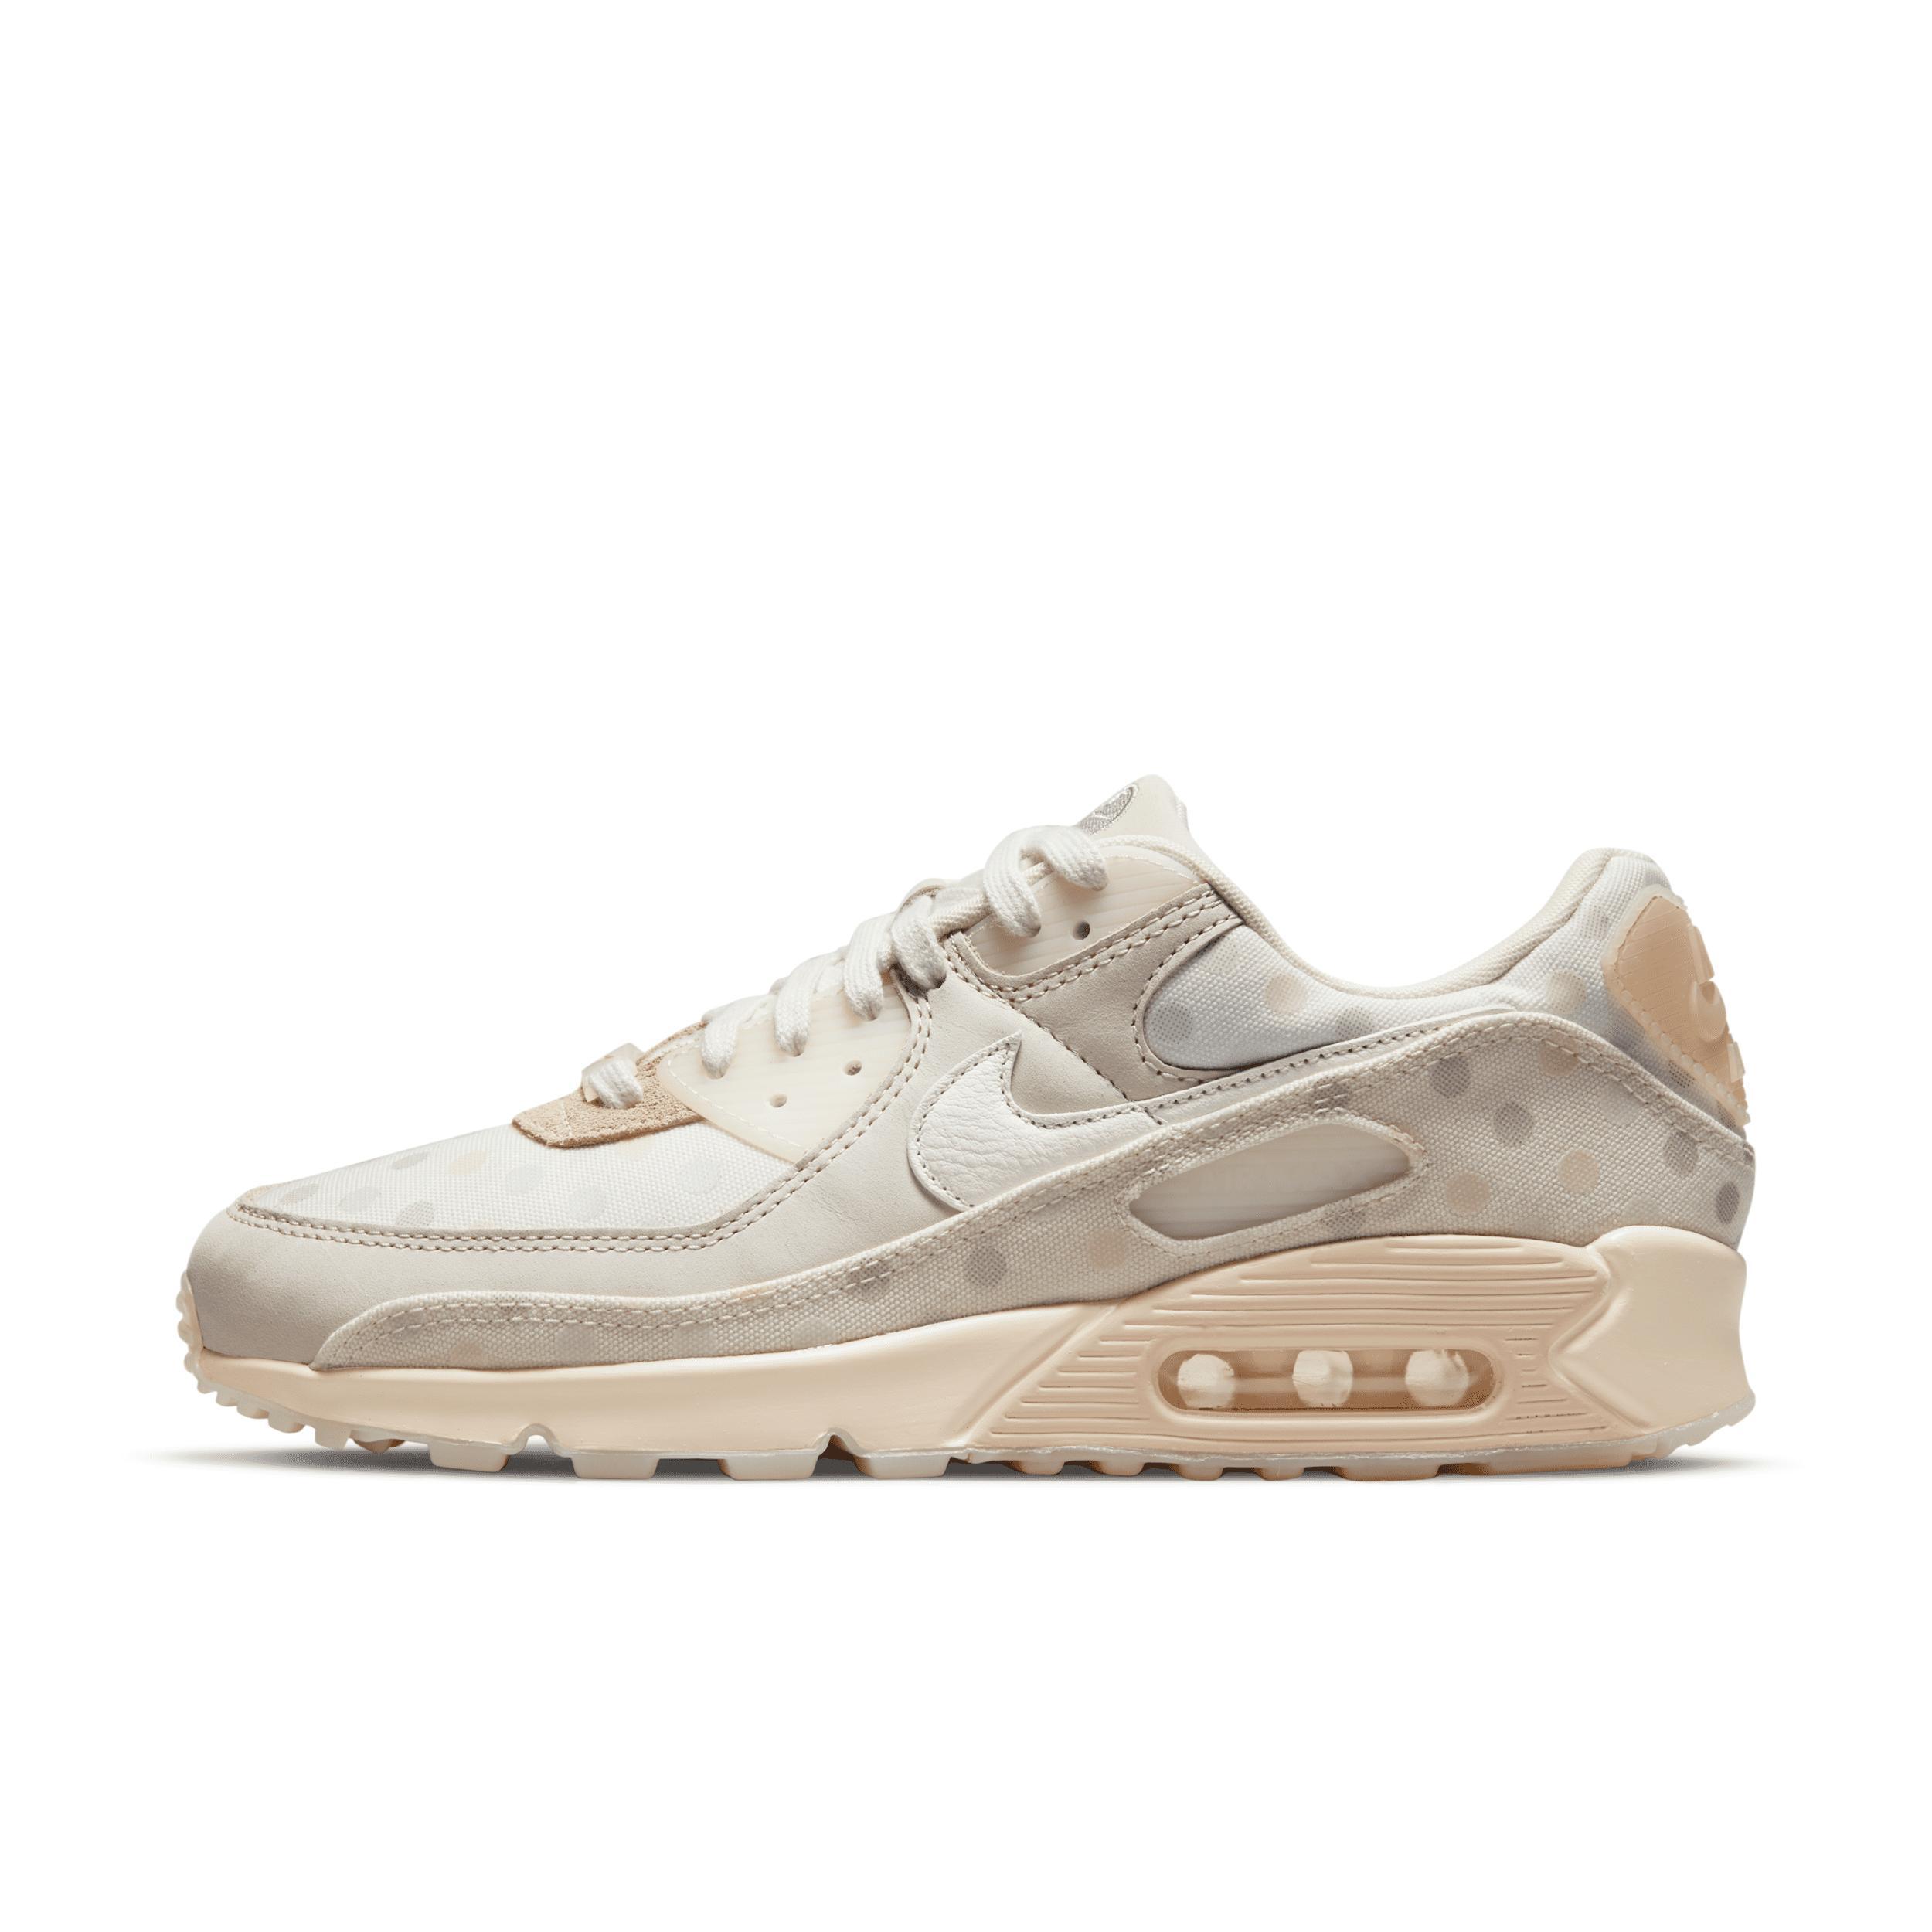 Nike Air Max 90 NRG (Shimmer/Sail/Desert Sand/Pale Ivory) Men's Shoes Product Image